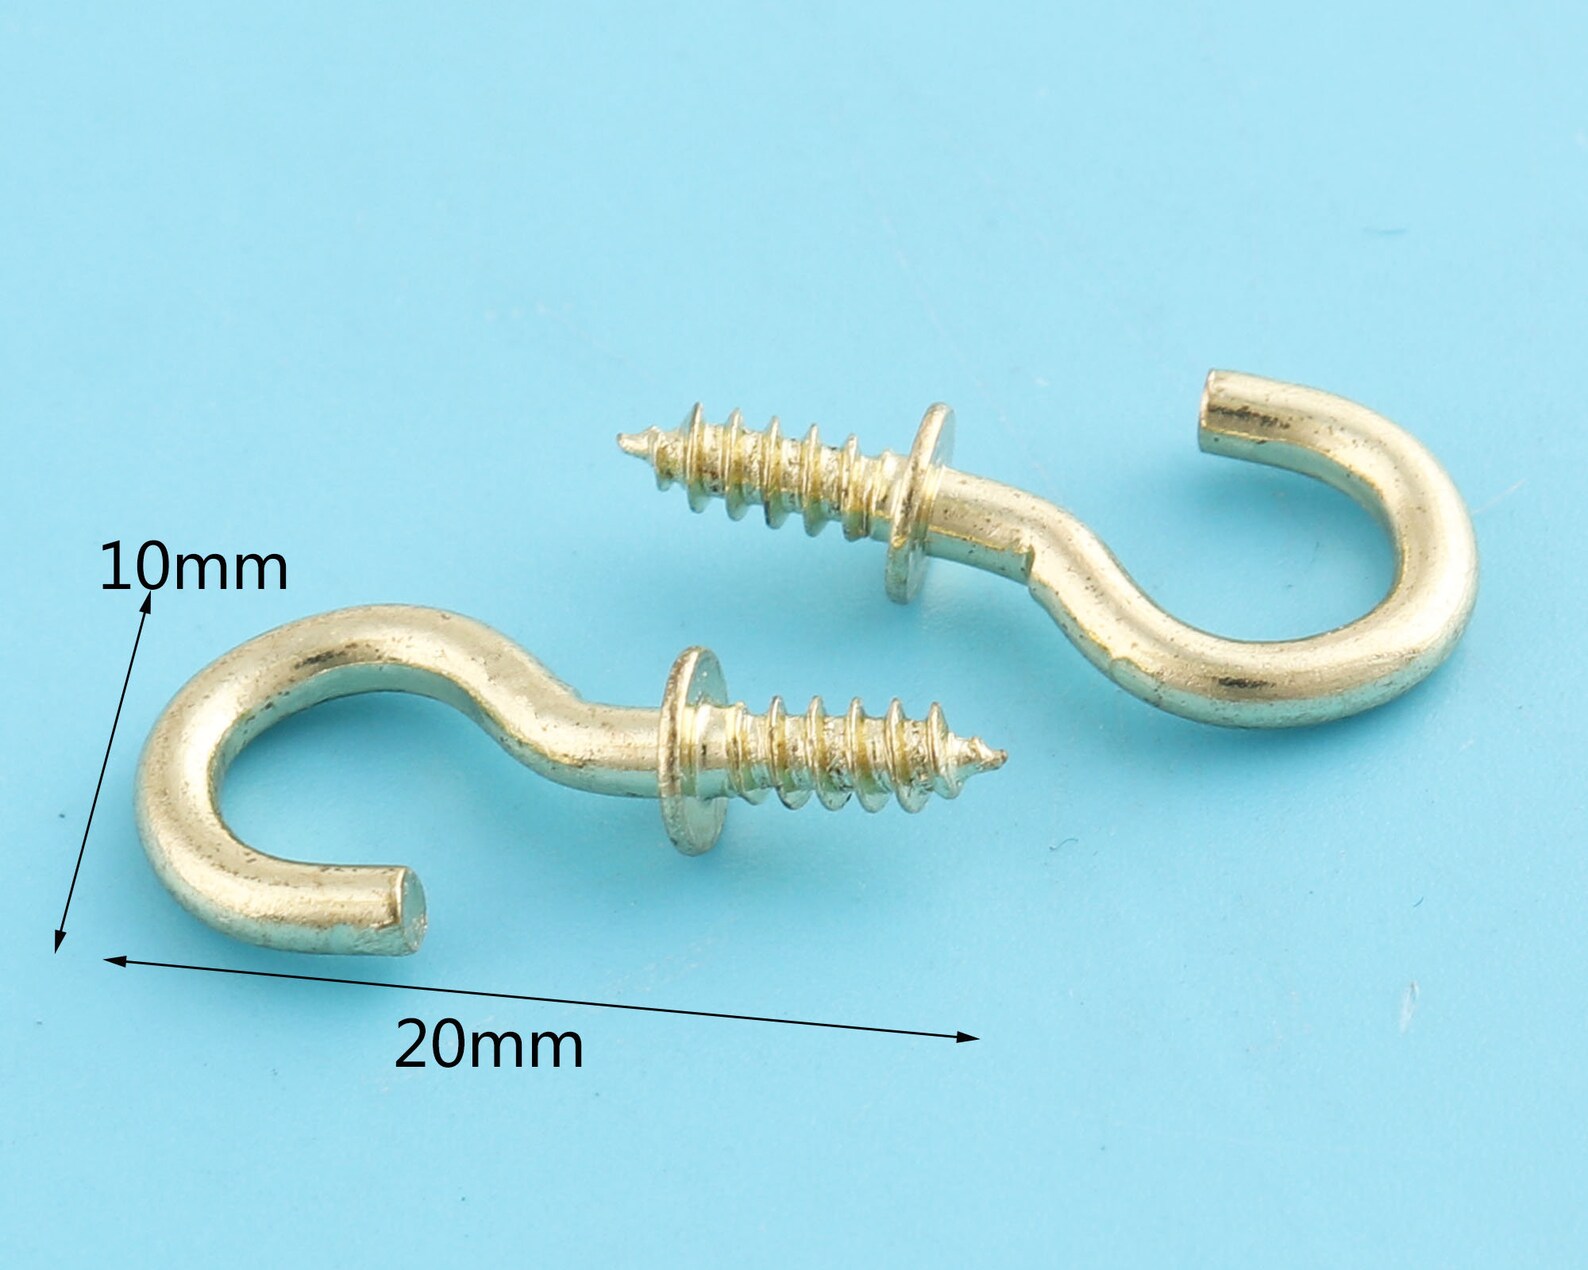 Screw Eye Bailsscrew Eye Pins With 1020 Mm Gold Colorfor Etsy